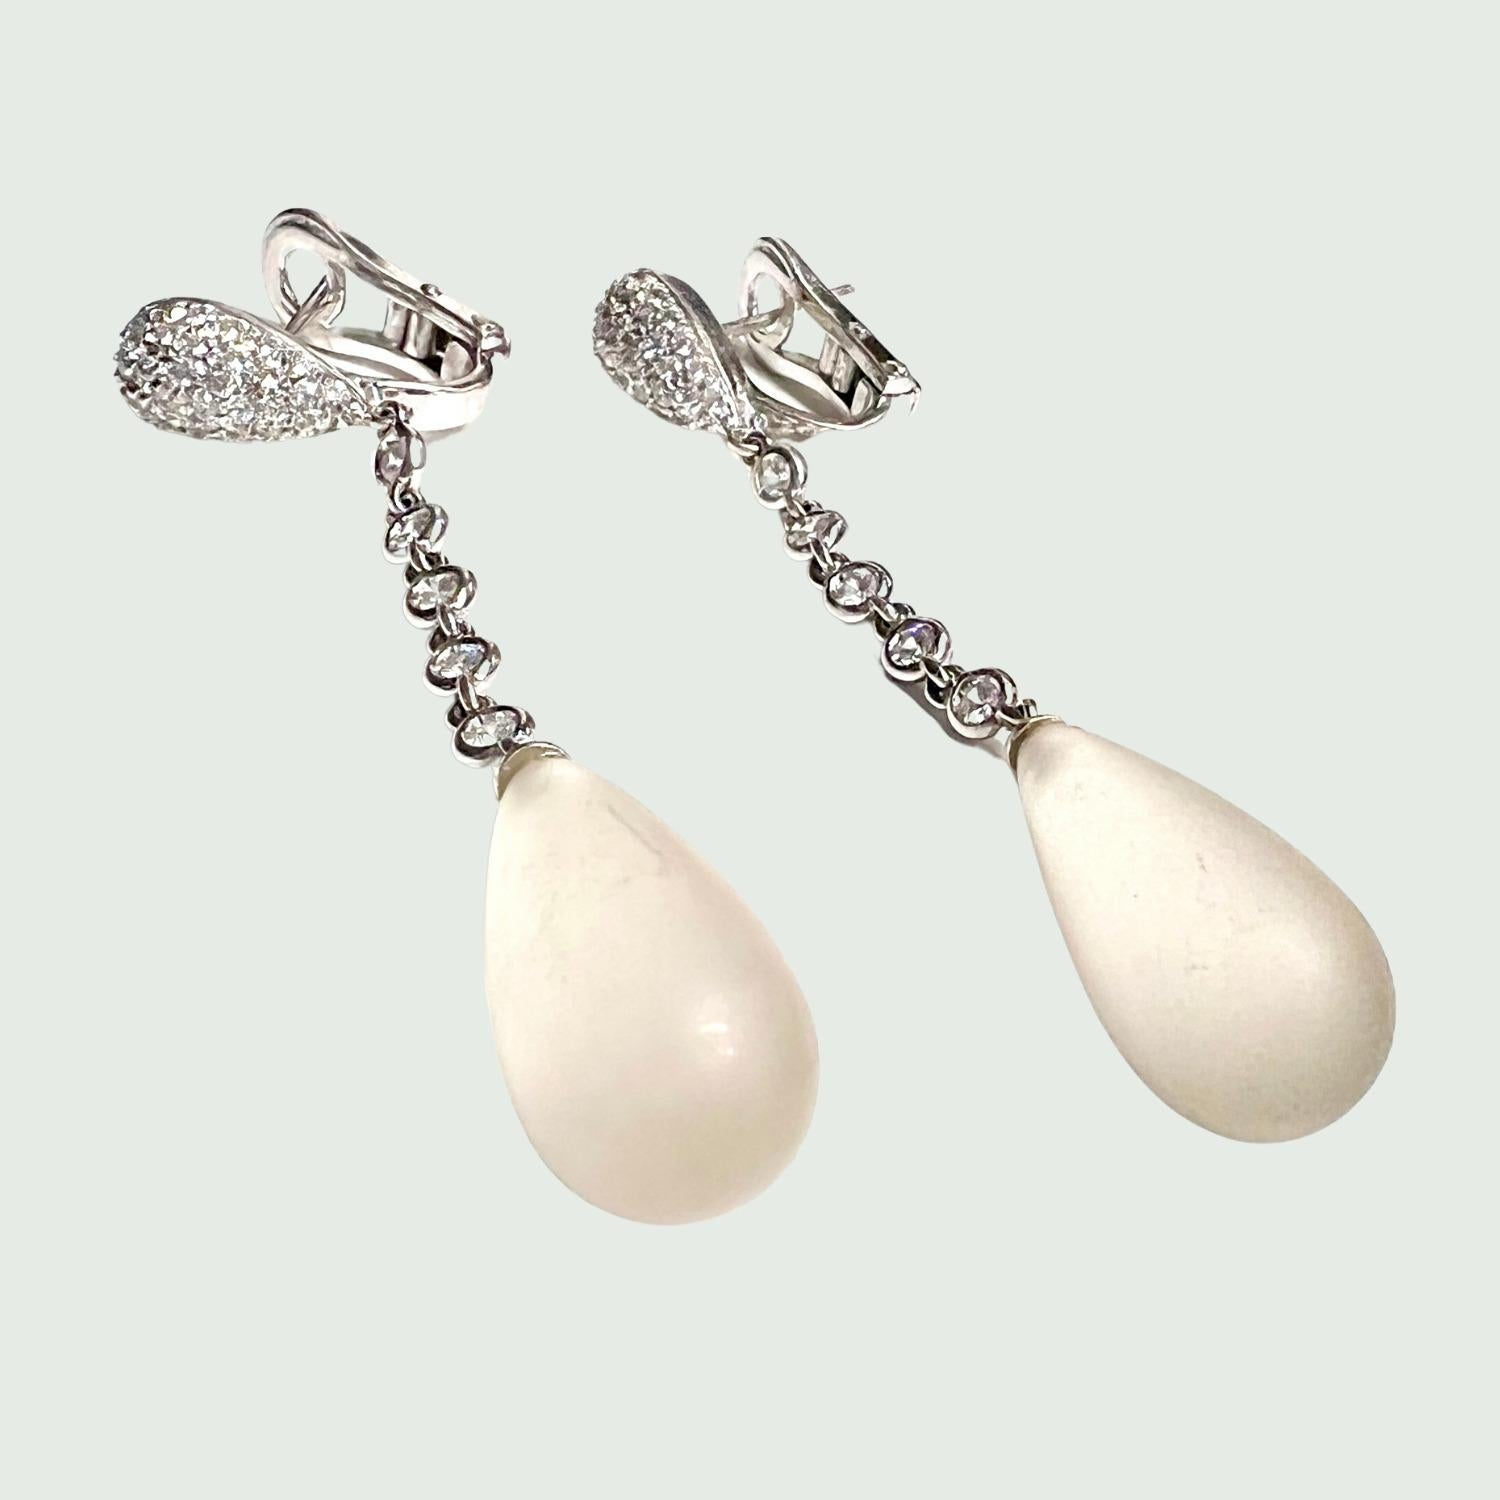 These stunning drop earrings are a masterpiece of elegance and sophistication. Crafted in luxurious 18k white gold, they feature exquisite tear-shaped Quartz stones complemented by brilliant-cut Diamonds totaling 1.00 carats.

With a length of 6cm